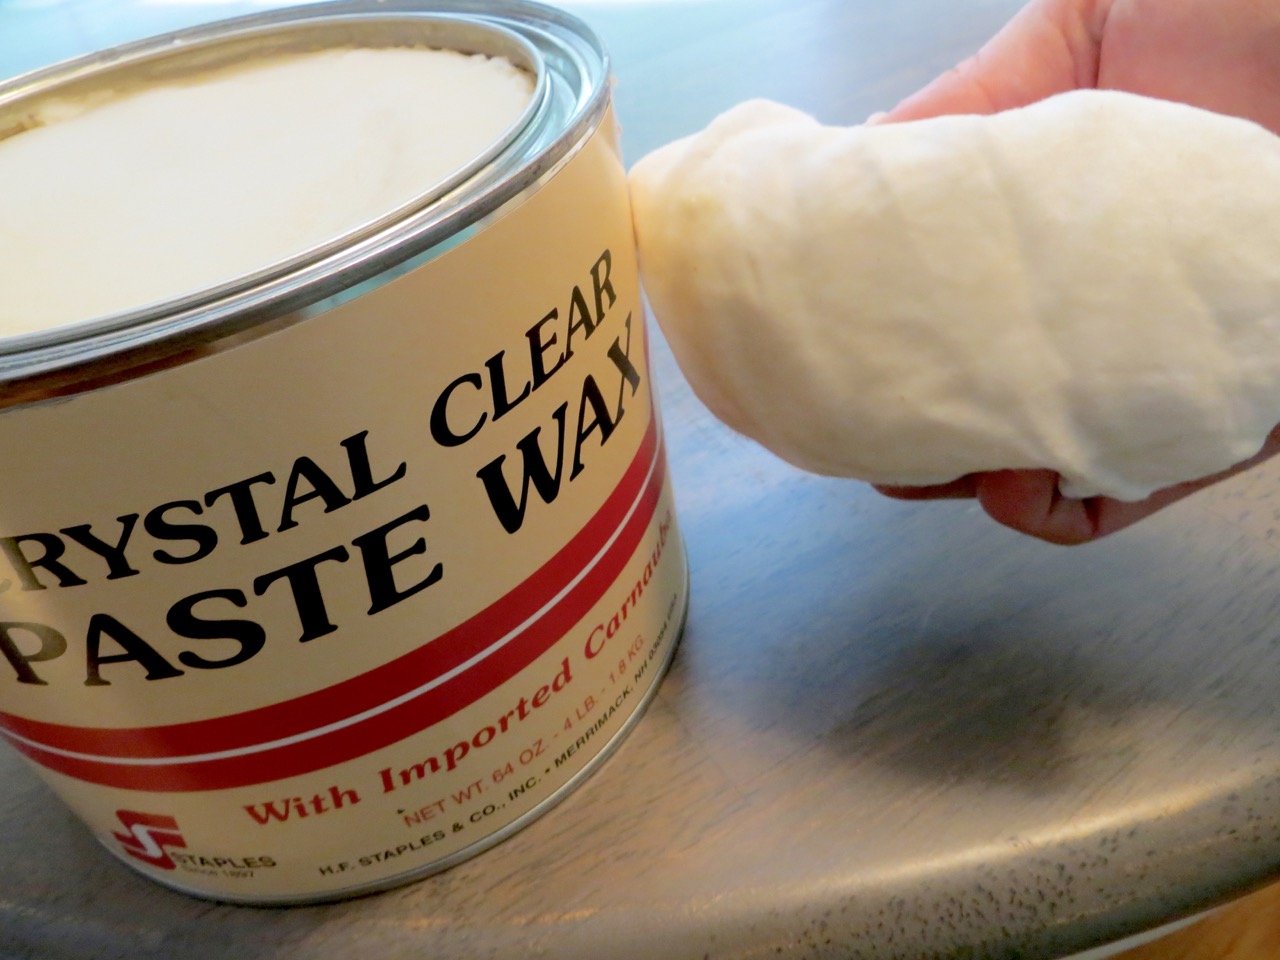 Crystal Clear Bowling Alley Wax, 4-LB. - H.F. Staples